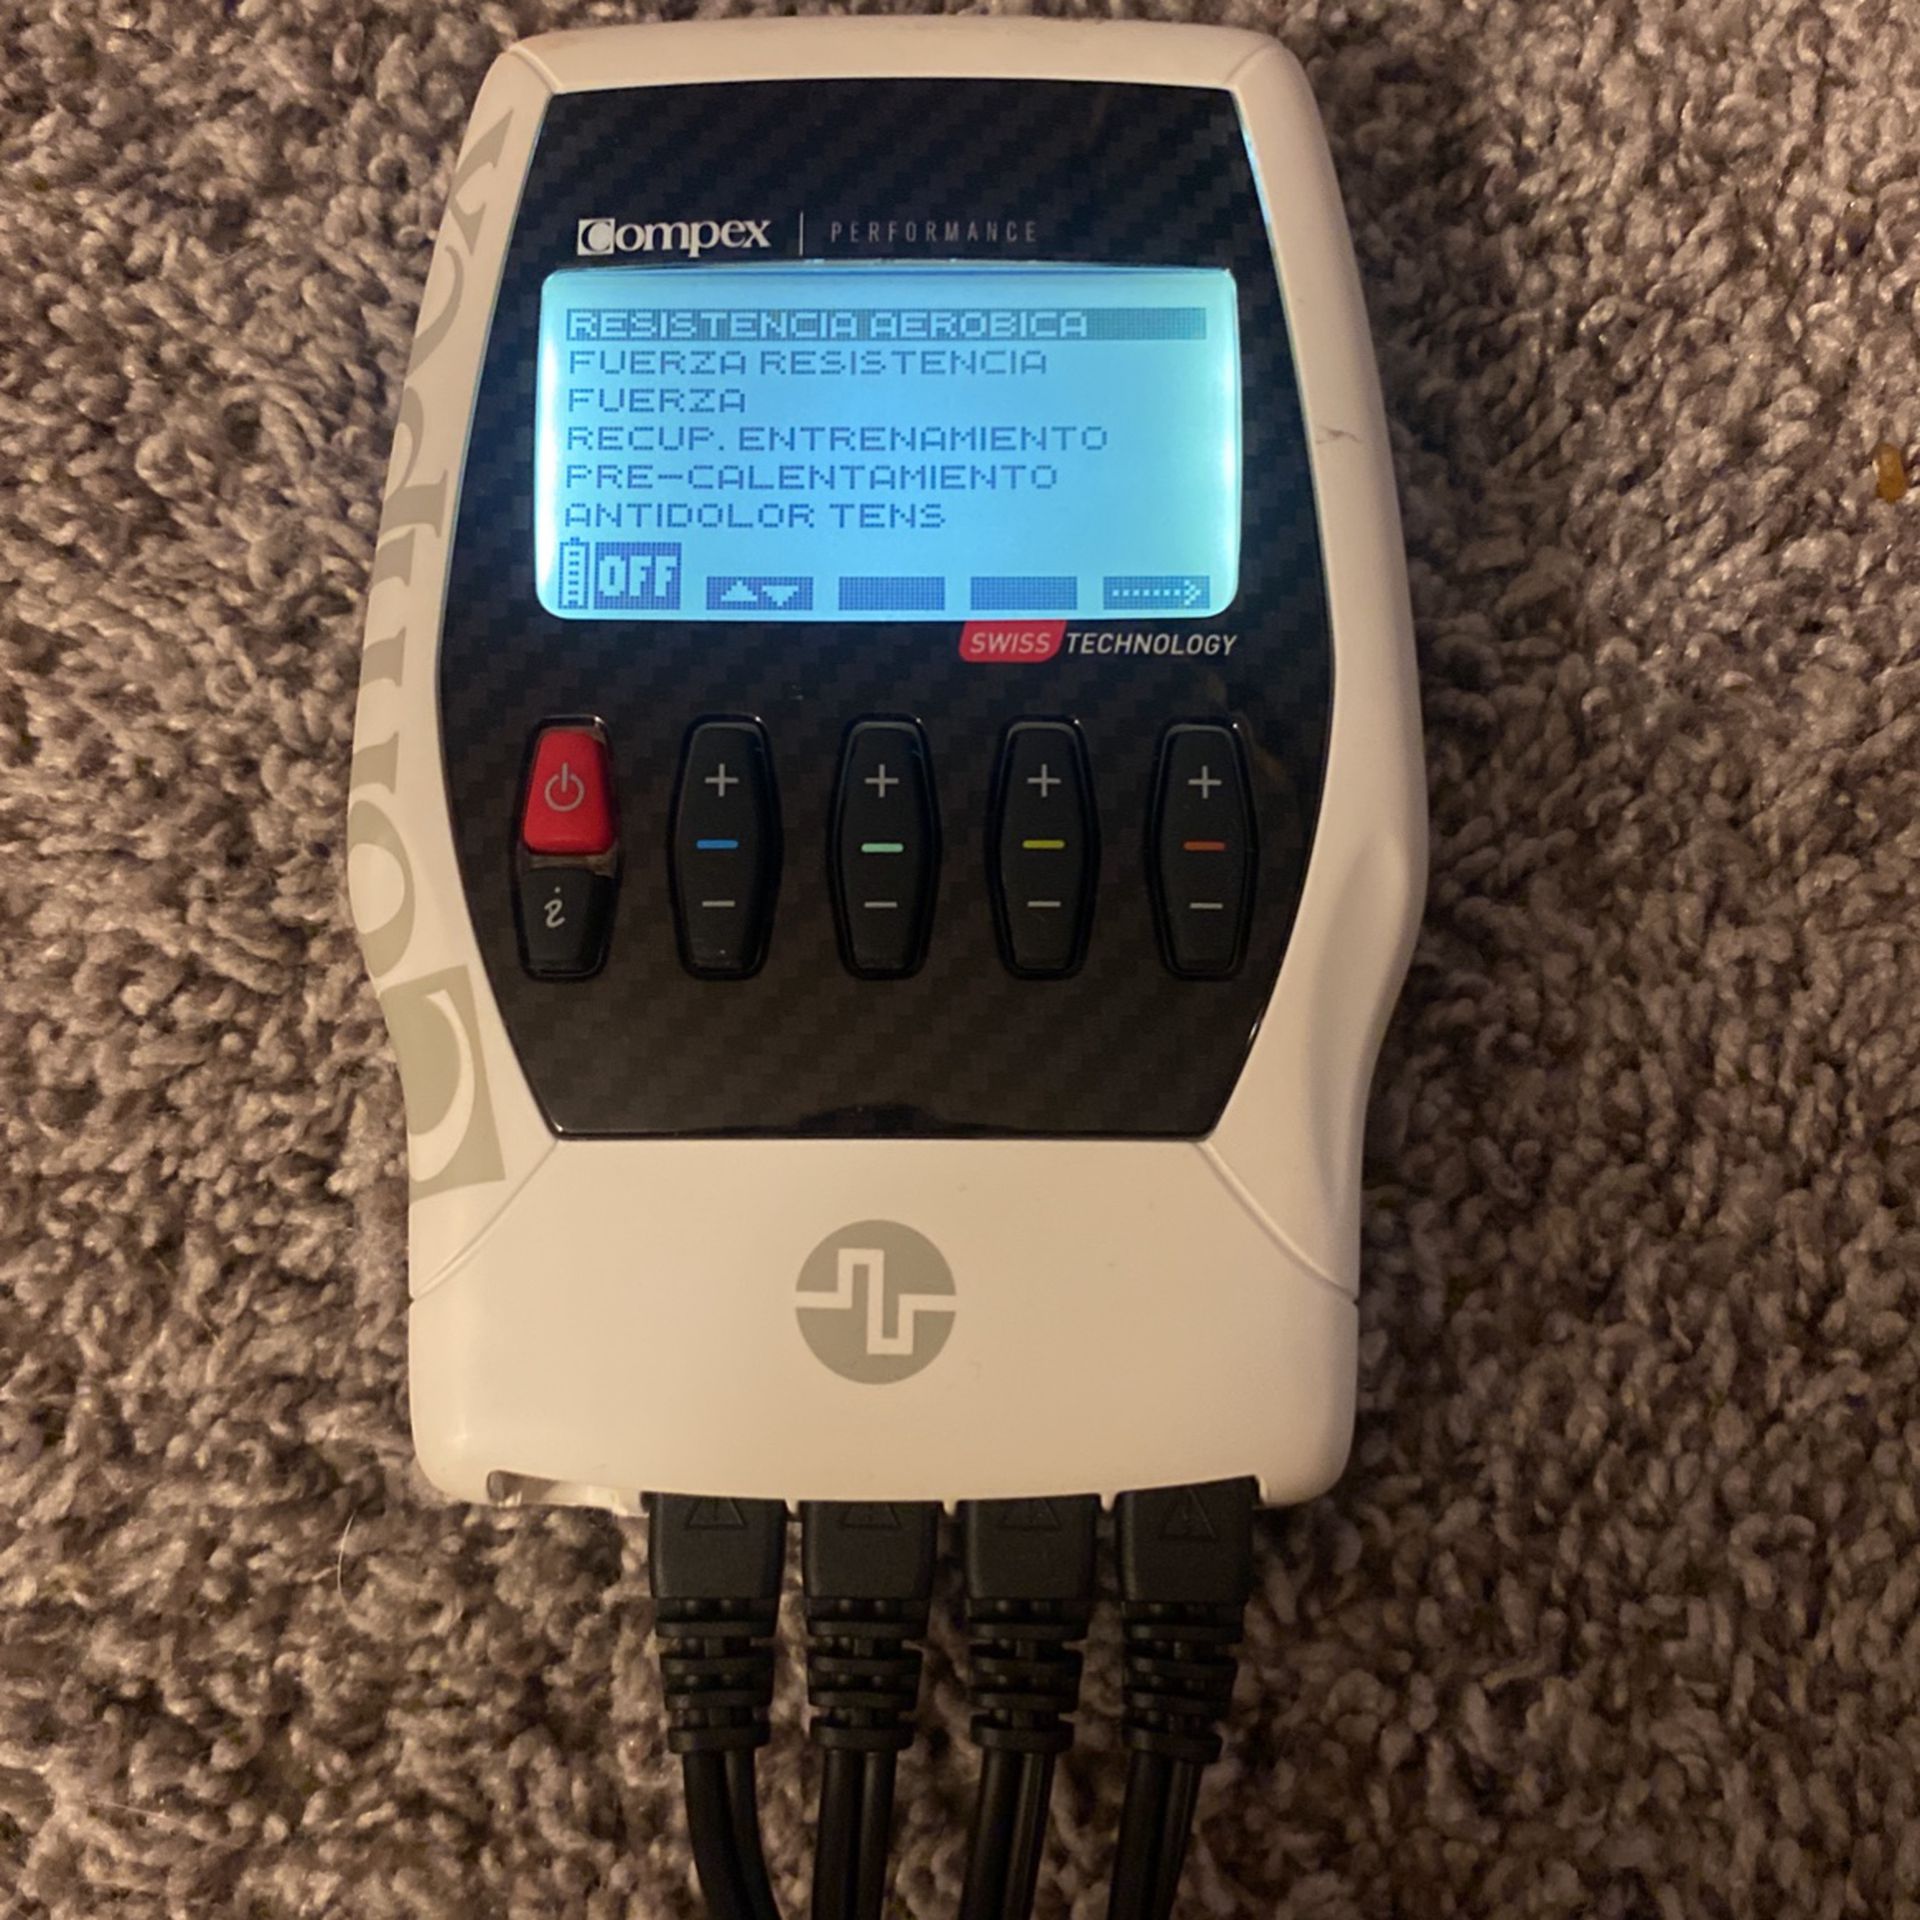 Compex Performance (Swiss Technology)